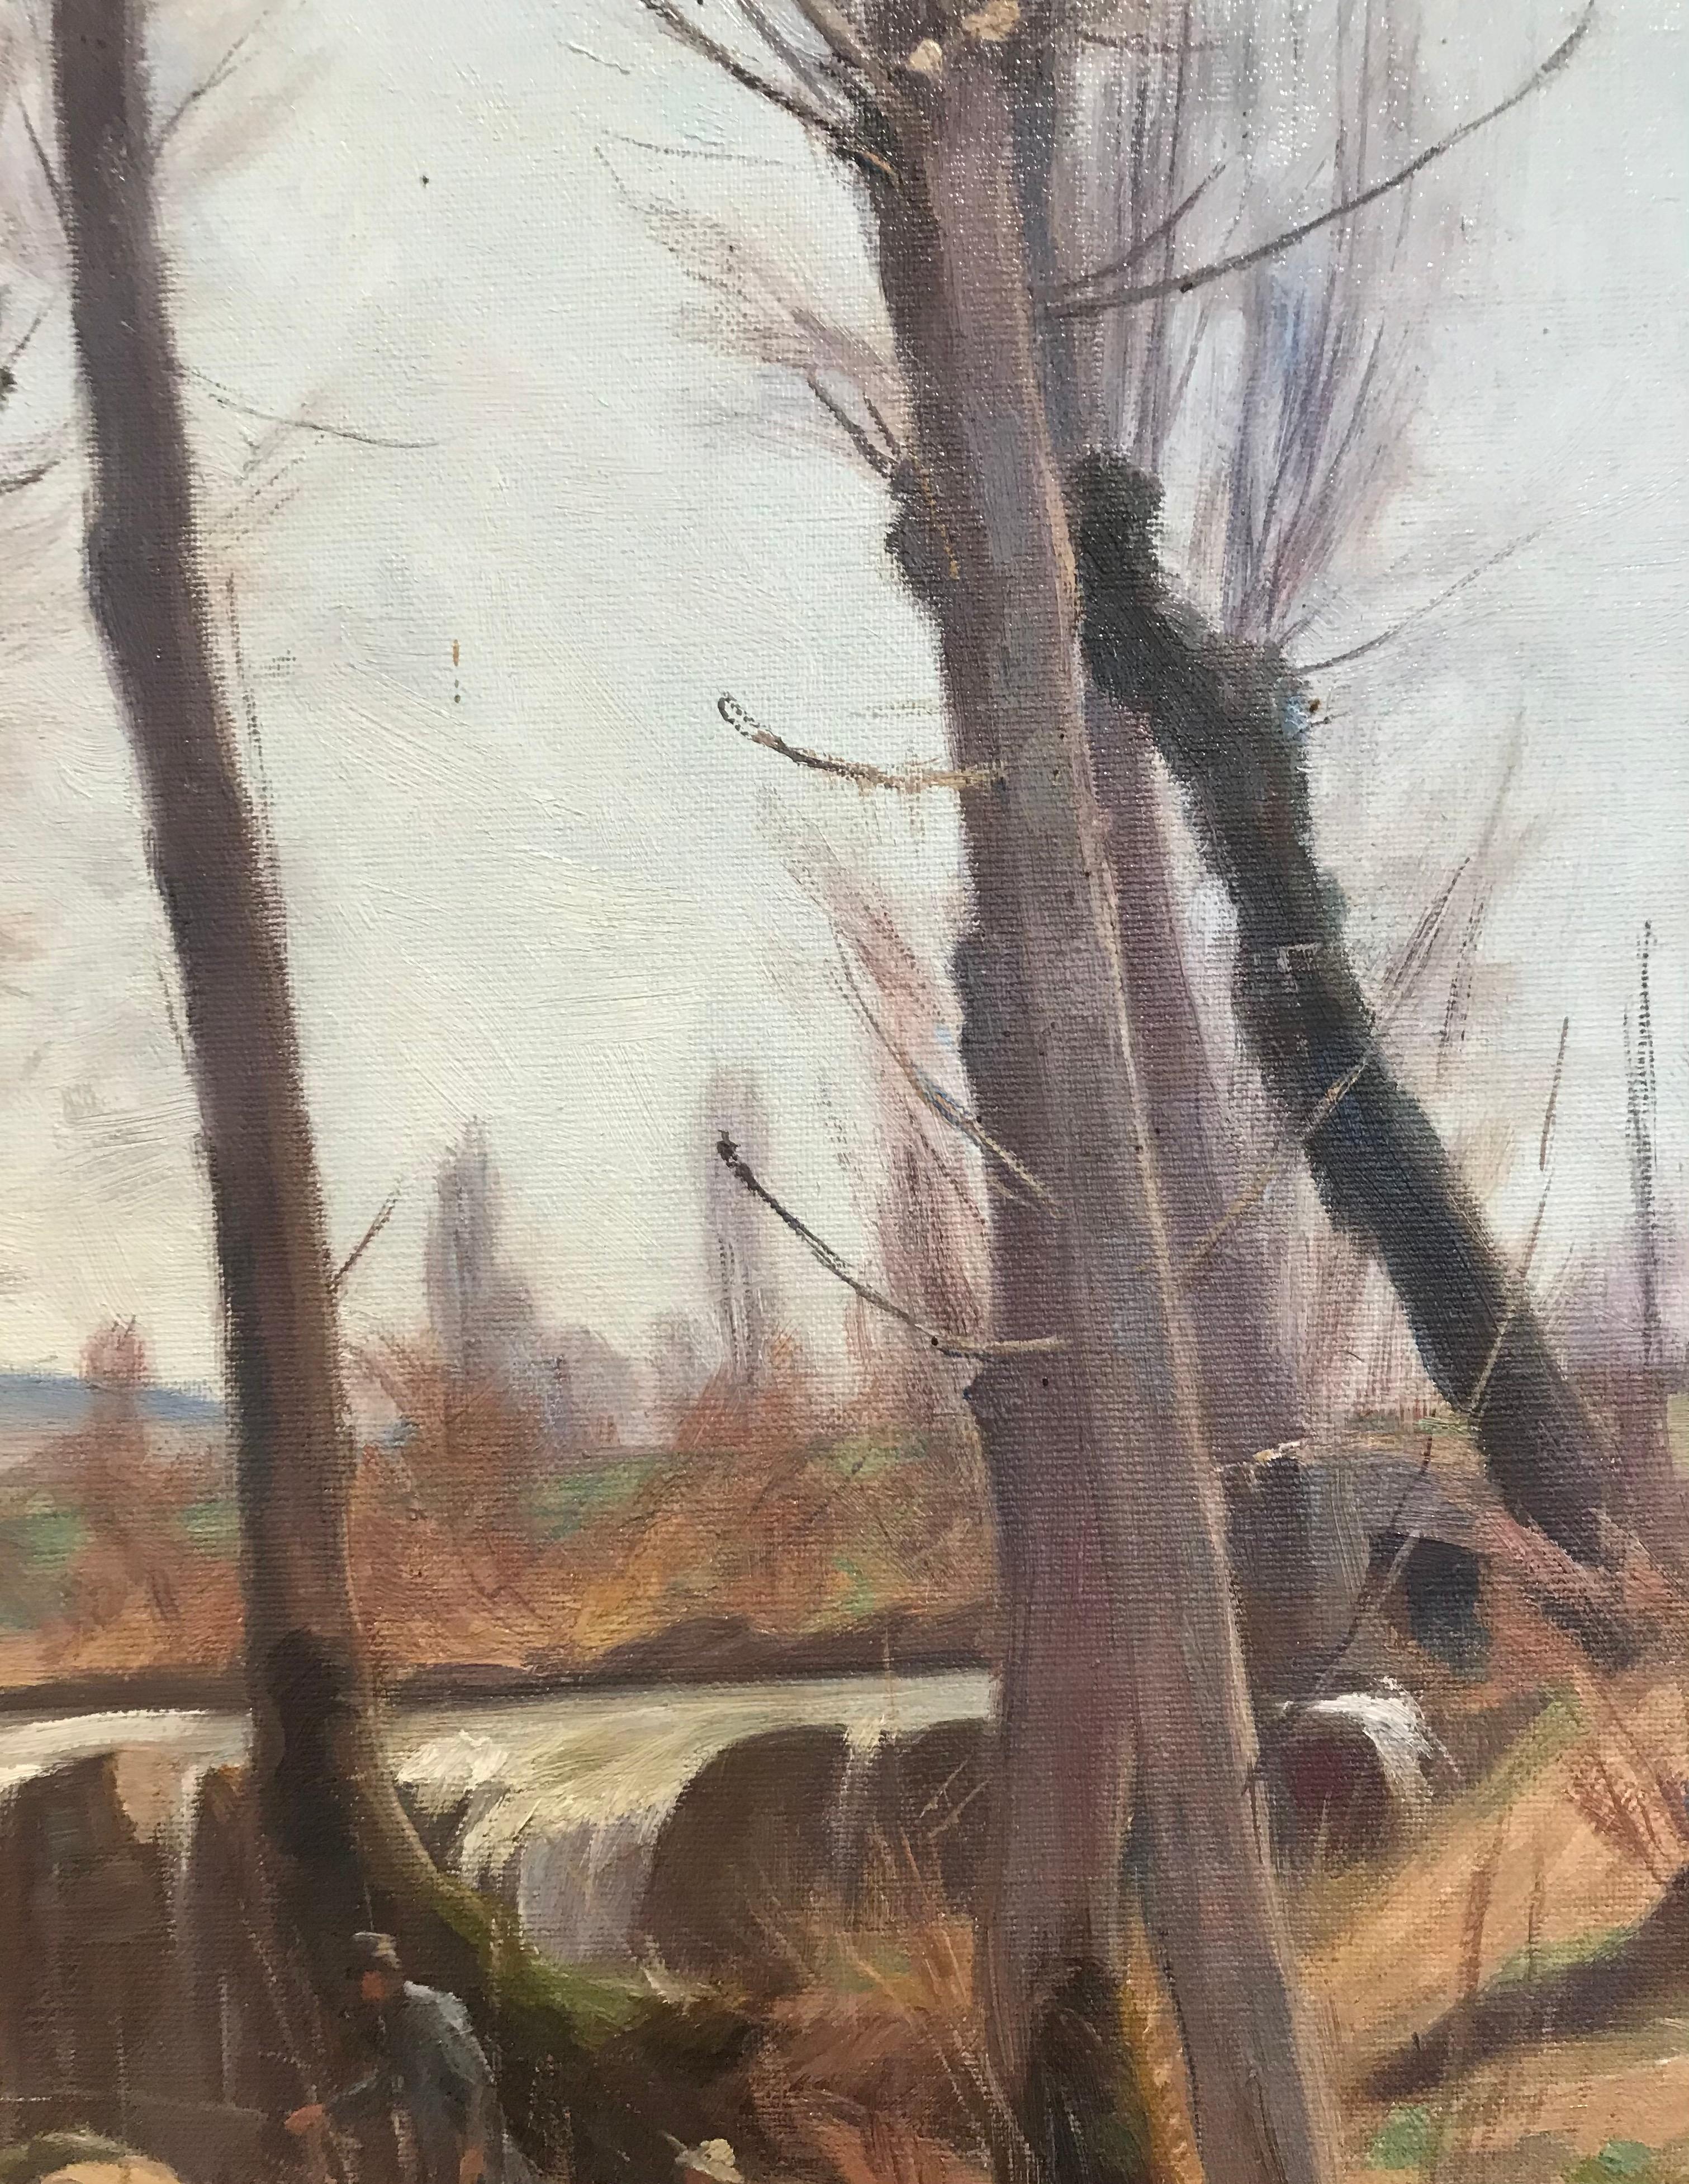 The Drize in spring, Troinex Geneva - Gray Landscape Painting by Jules Matthey